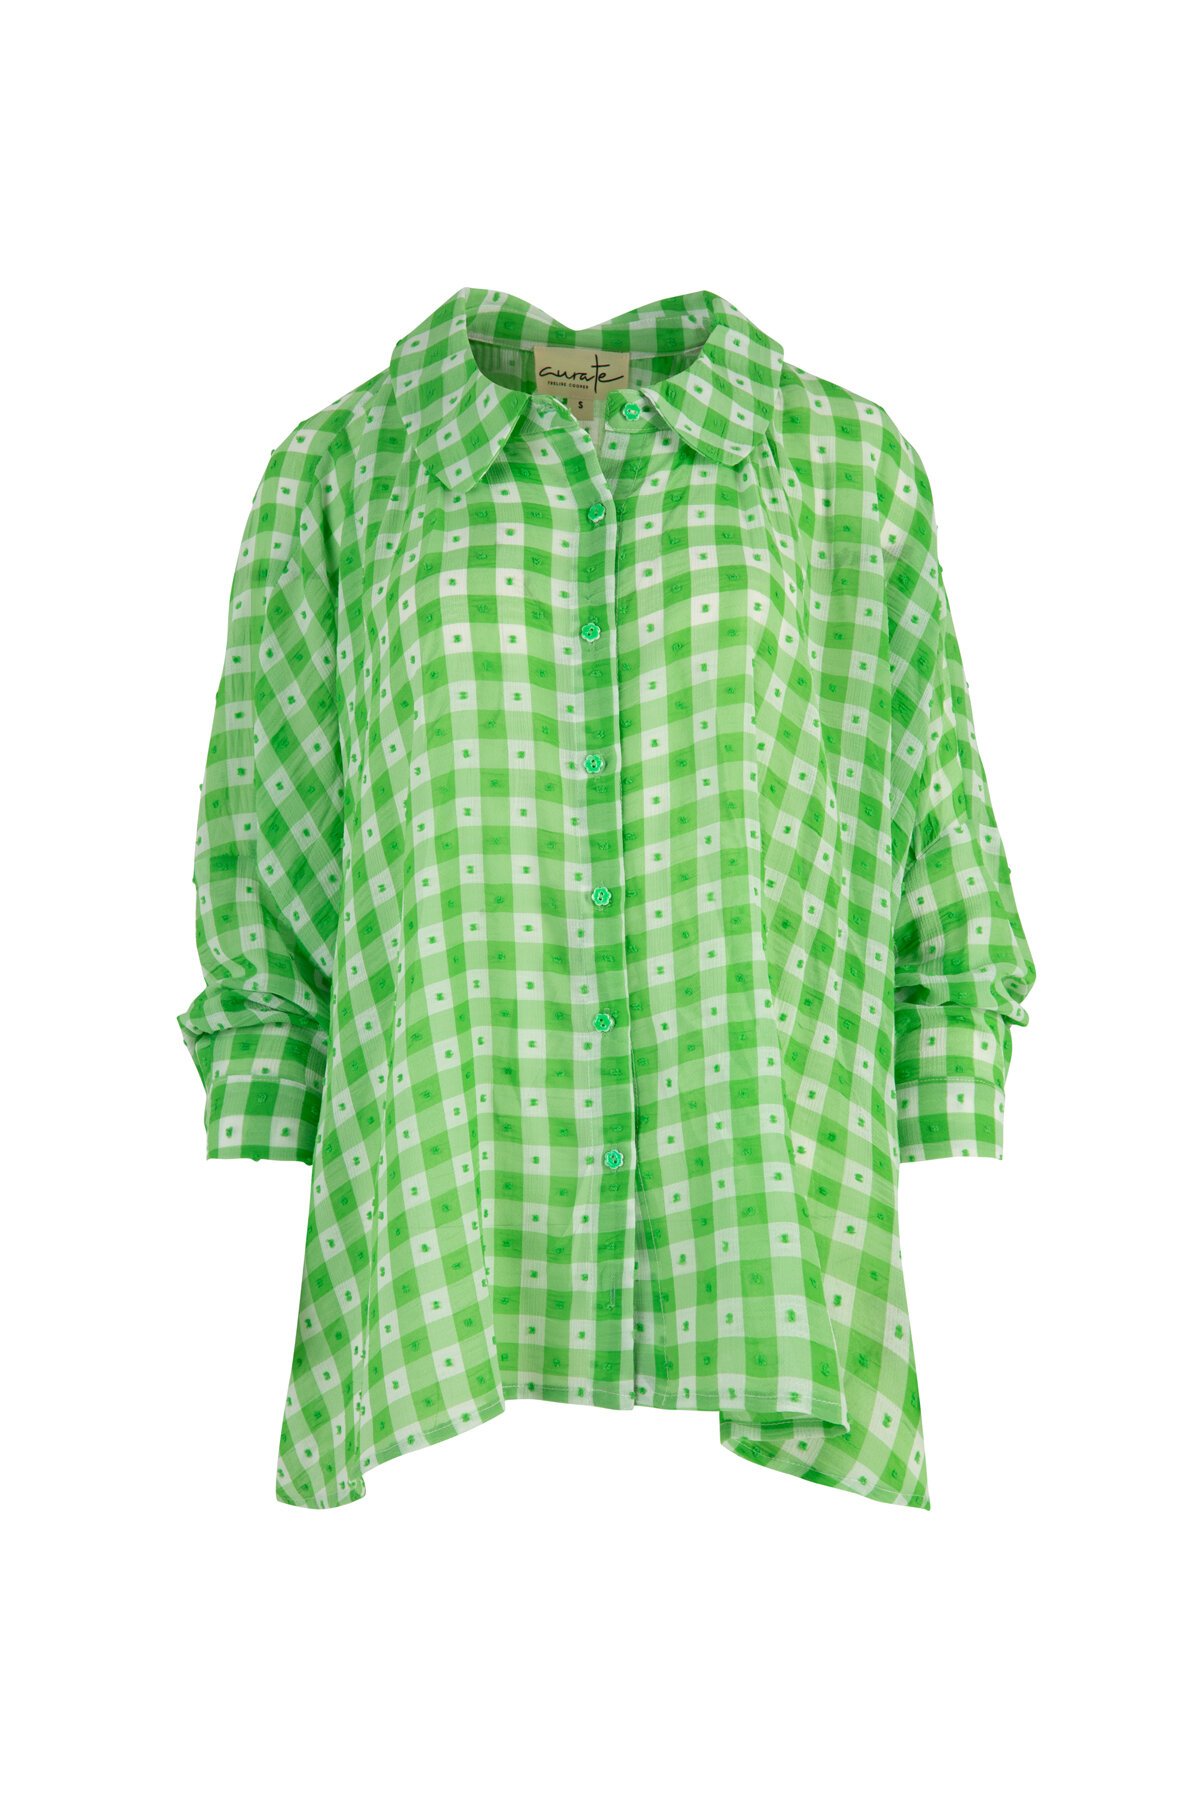 COLLAR SIGN Shirt - Curate : Trelise Cooper Online - Checkered Past ...